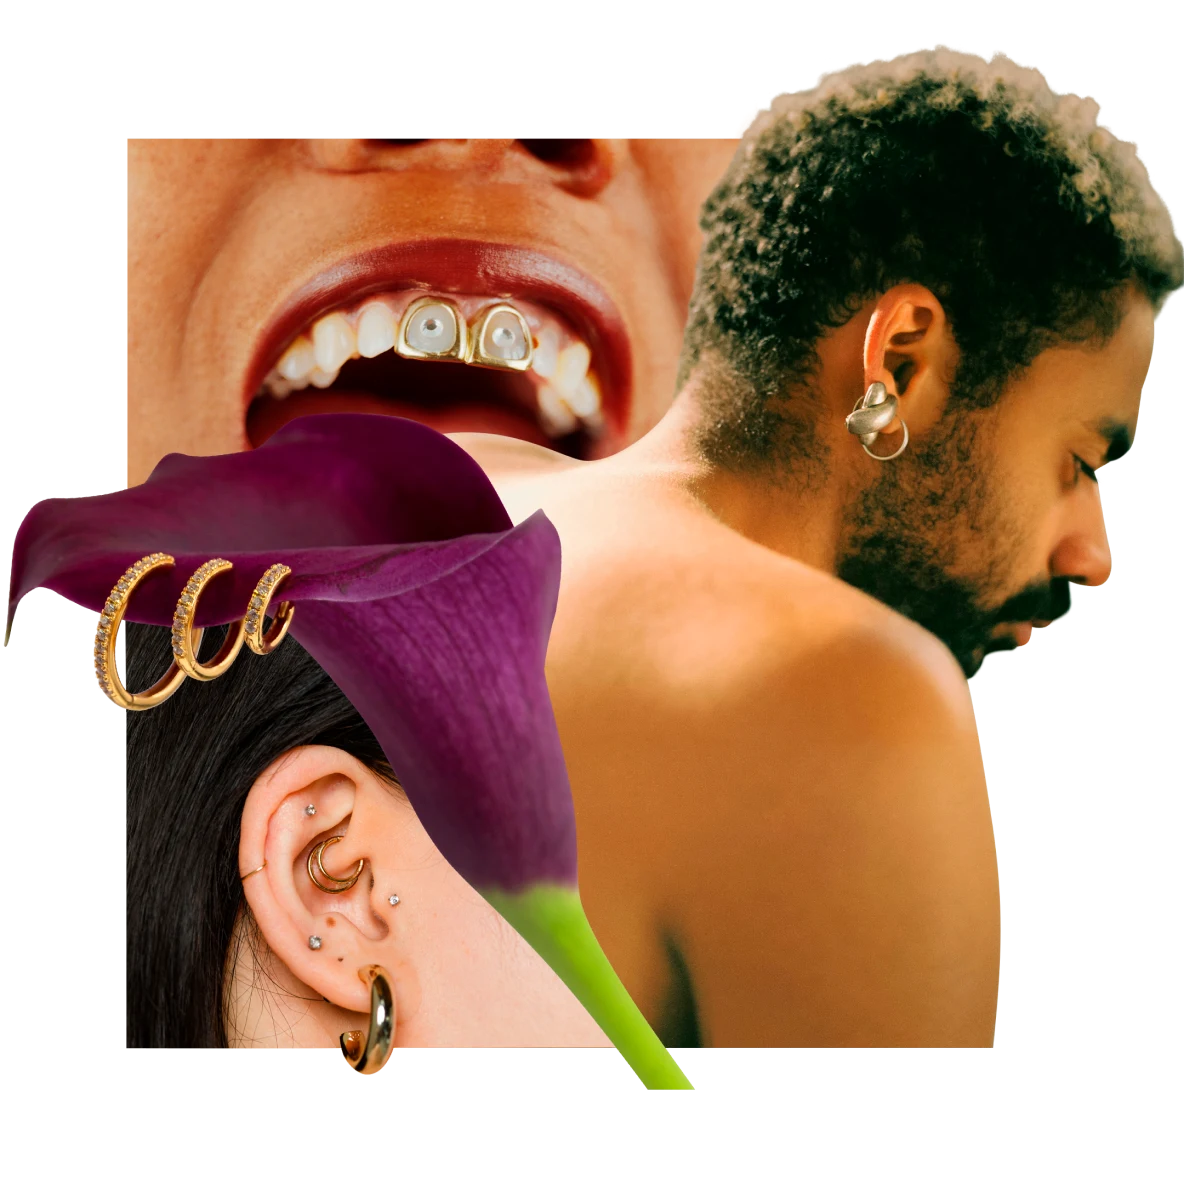 A shirtless Black man, with a large silver earring is in the centre. A purple calla lily, with three gold earrings attached to the petal is beside a woman’s ear with silver studs and gold hoops. An open mouth with two front gold teeth is at the back.